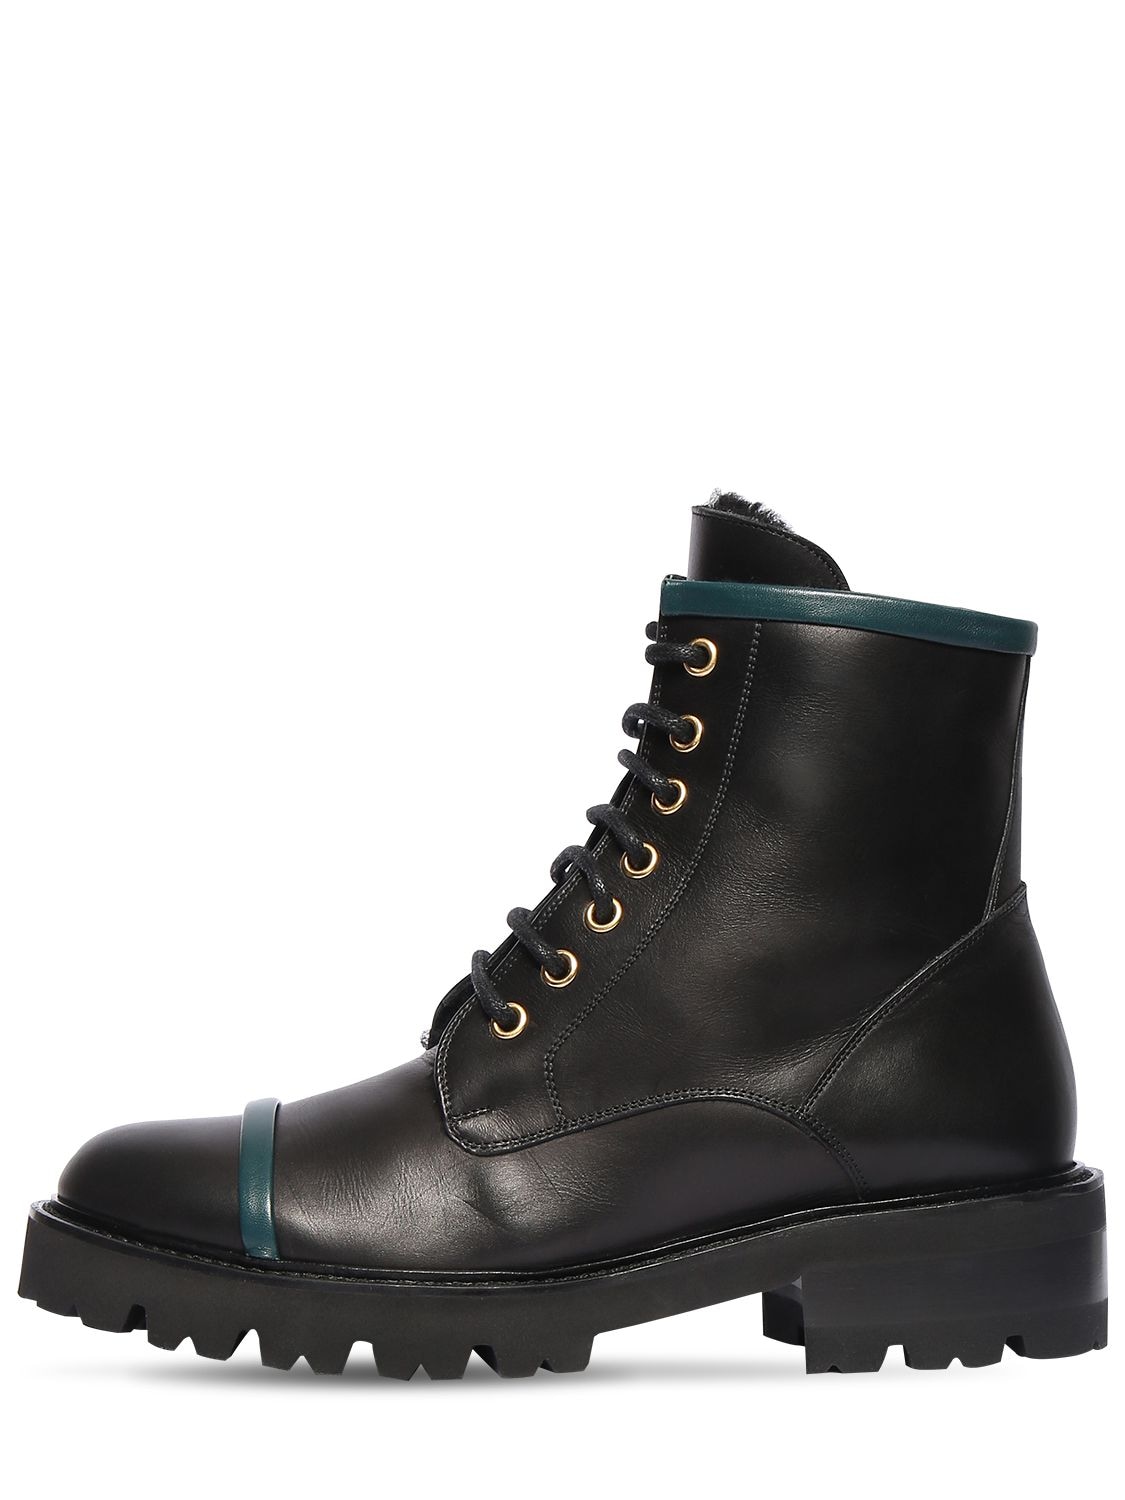 30mm Bryce Leather Combat Boots